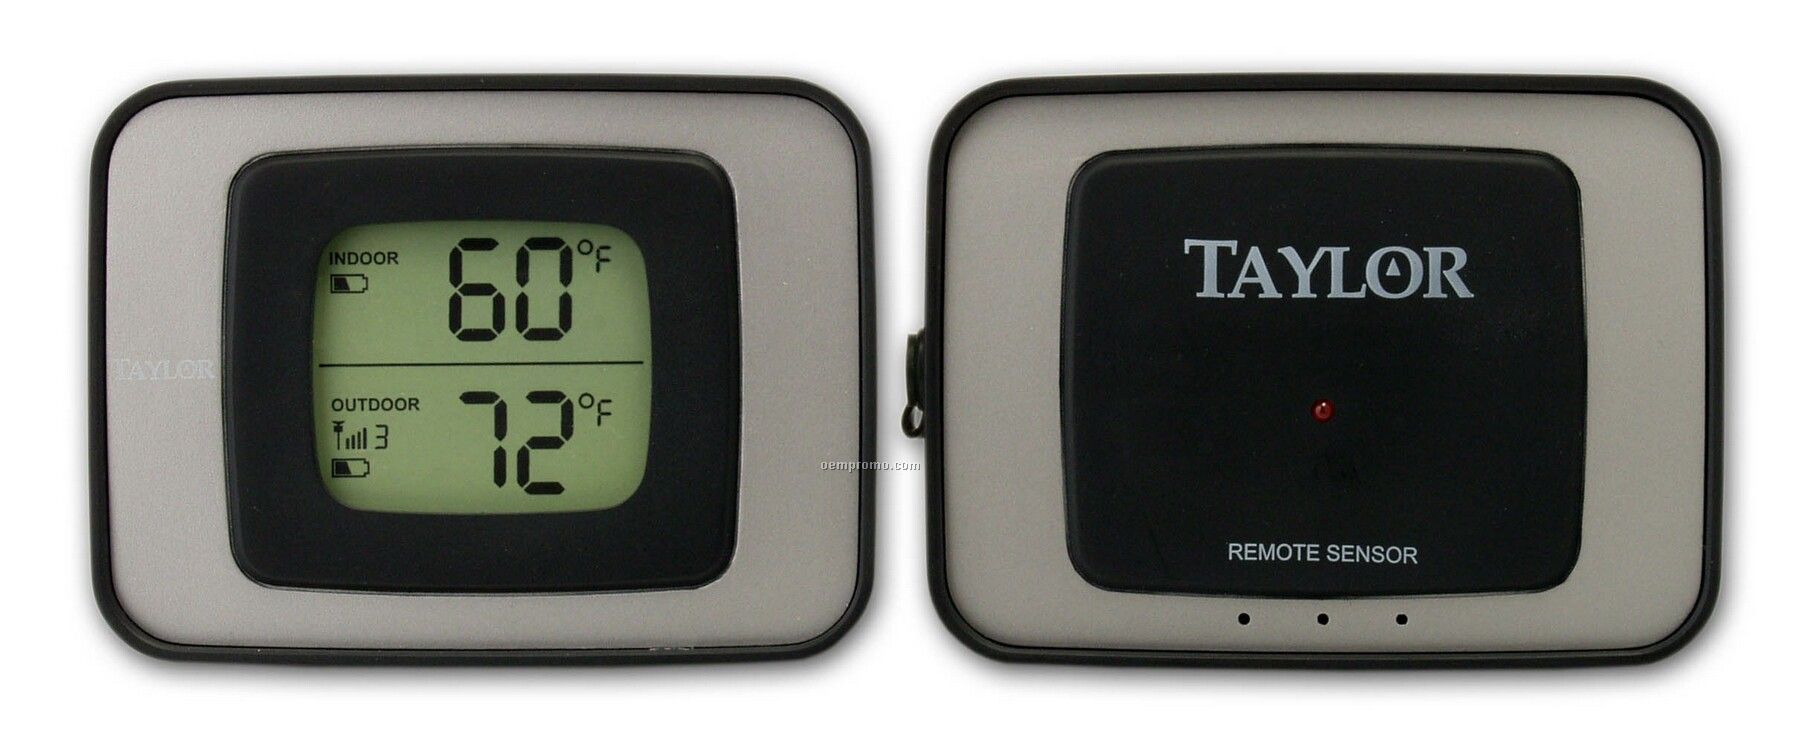 Taylor-Wireless-Indoor-And-Outdoor-Thermometer_95337632.jpg